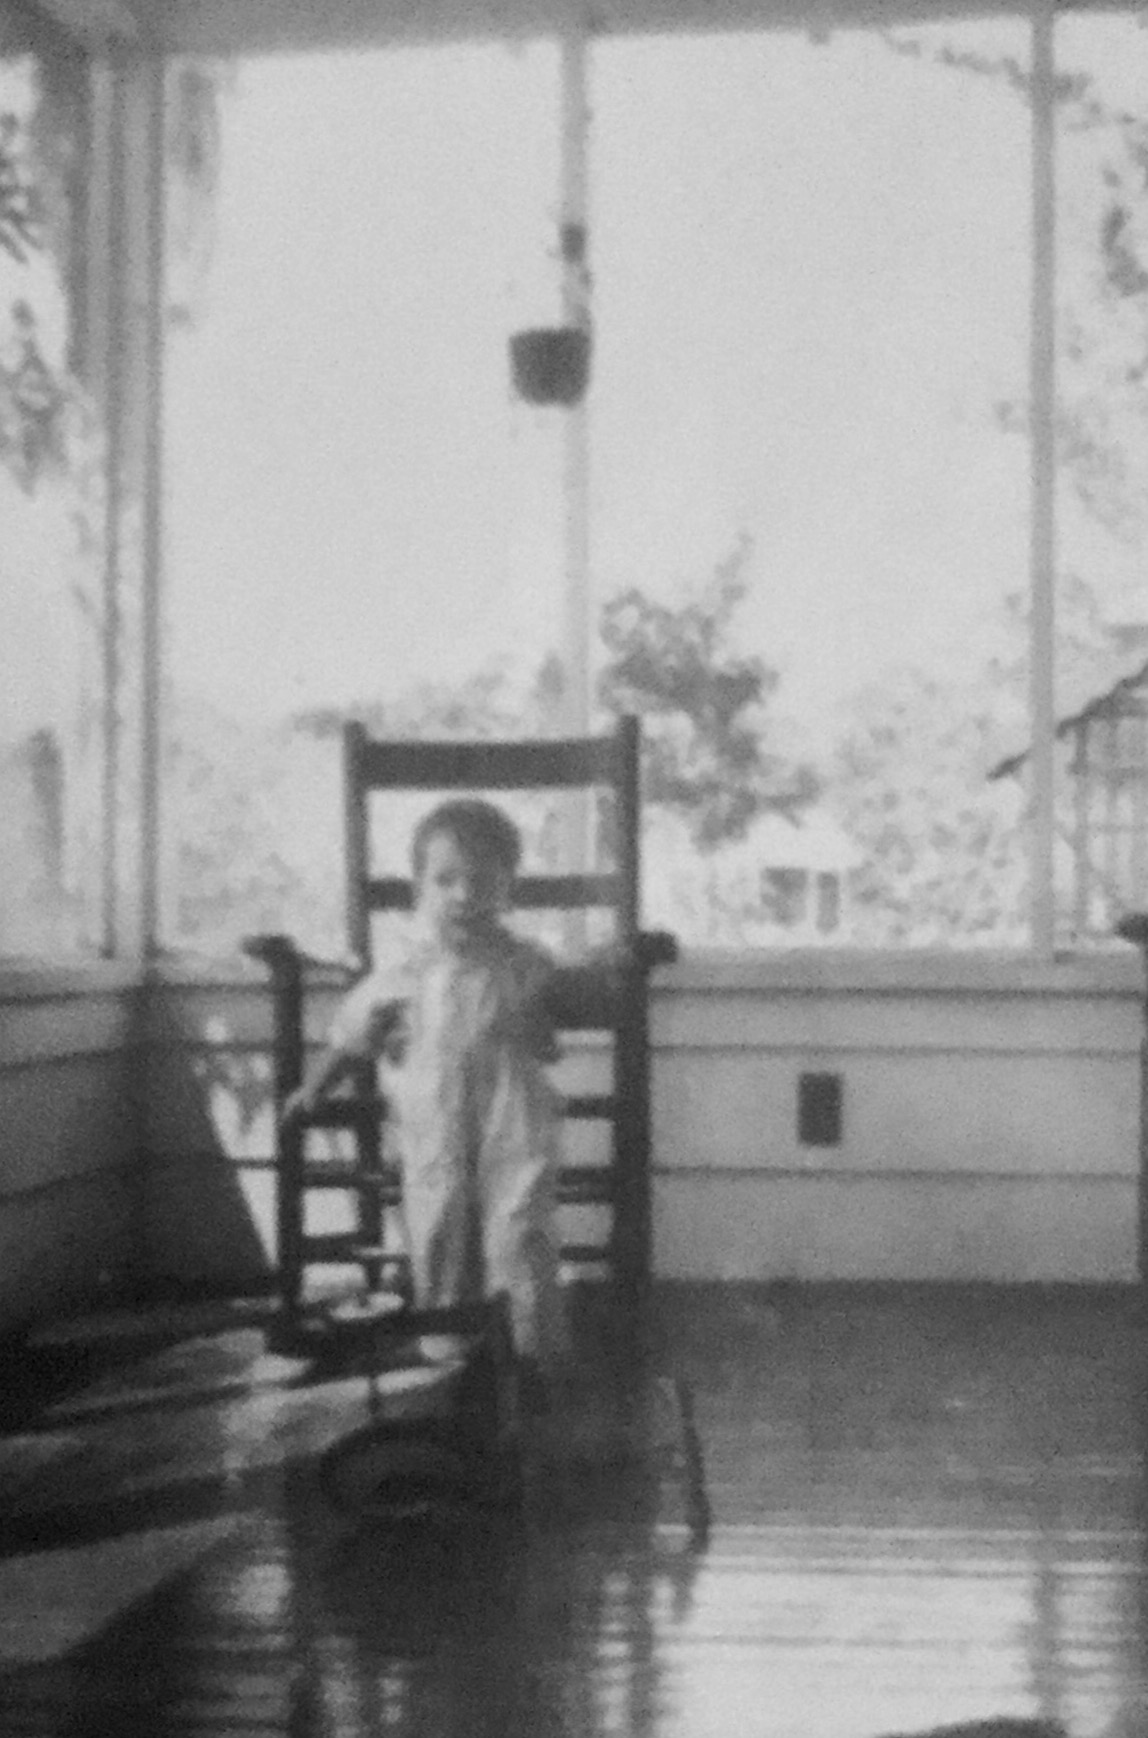 William Whiting (me) on front porch 20th ave south St. Petersburg Florida 1948.